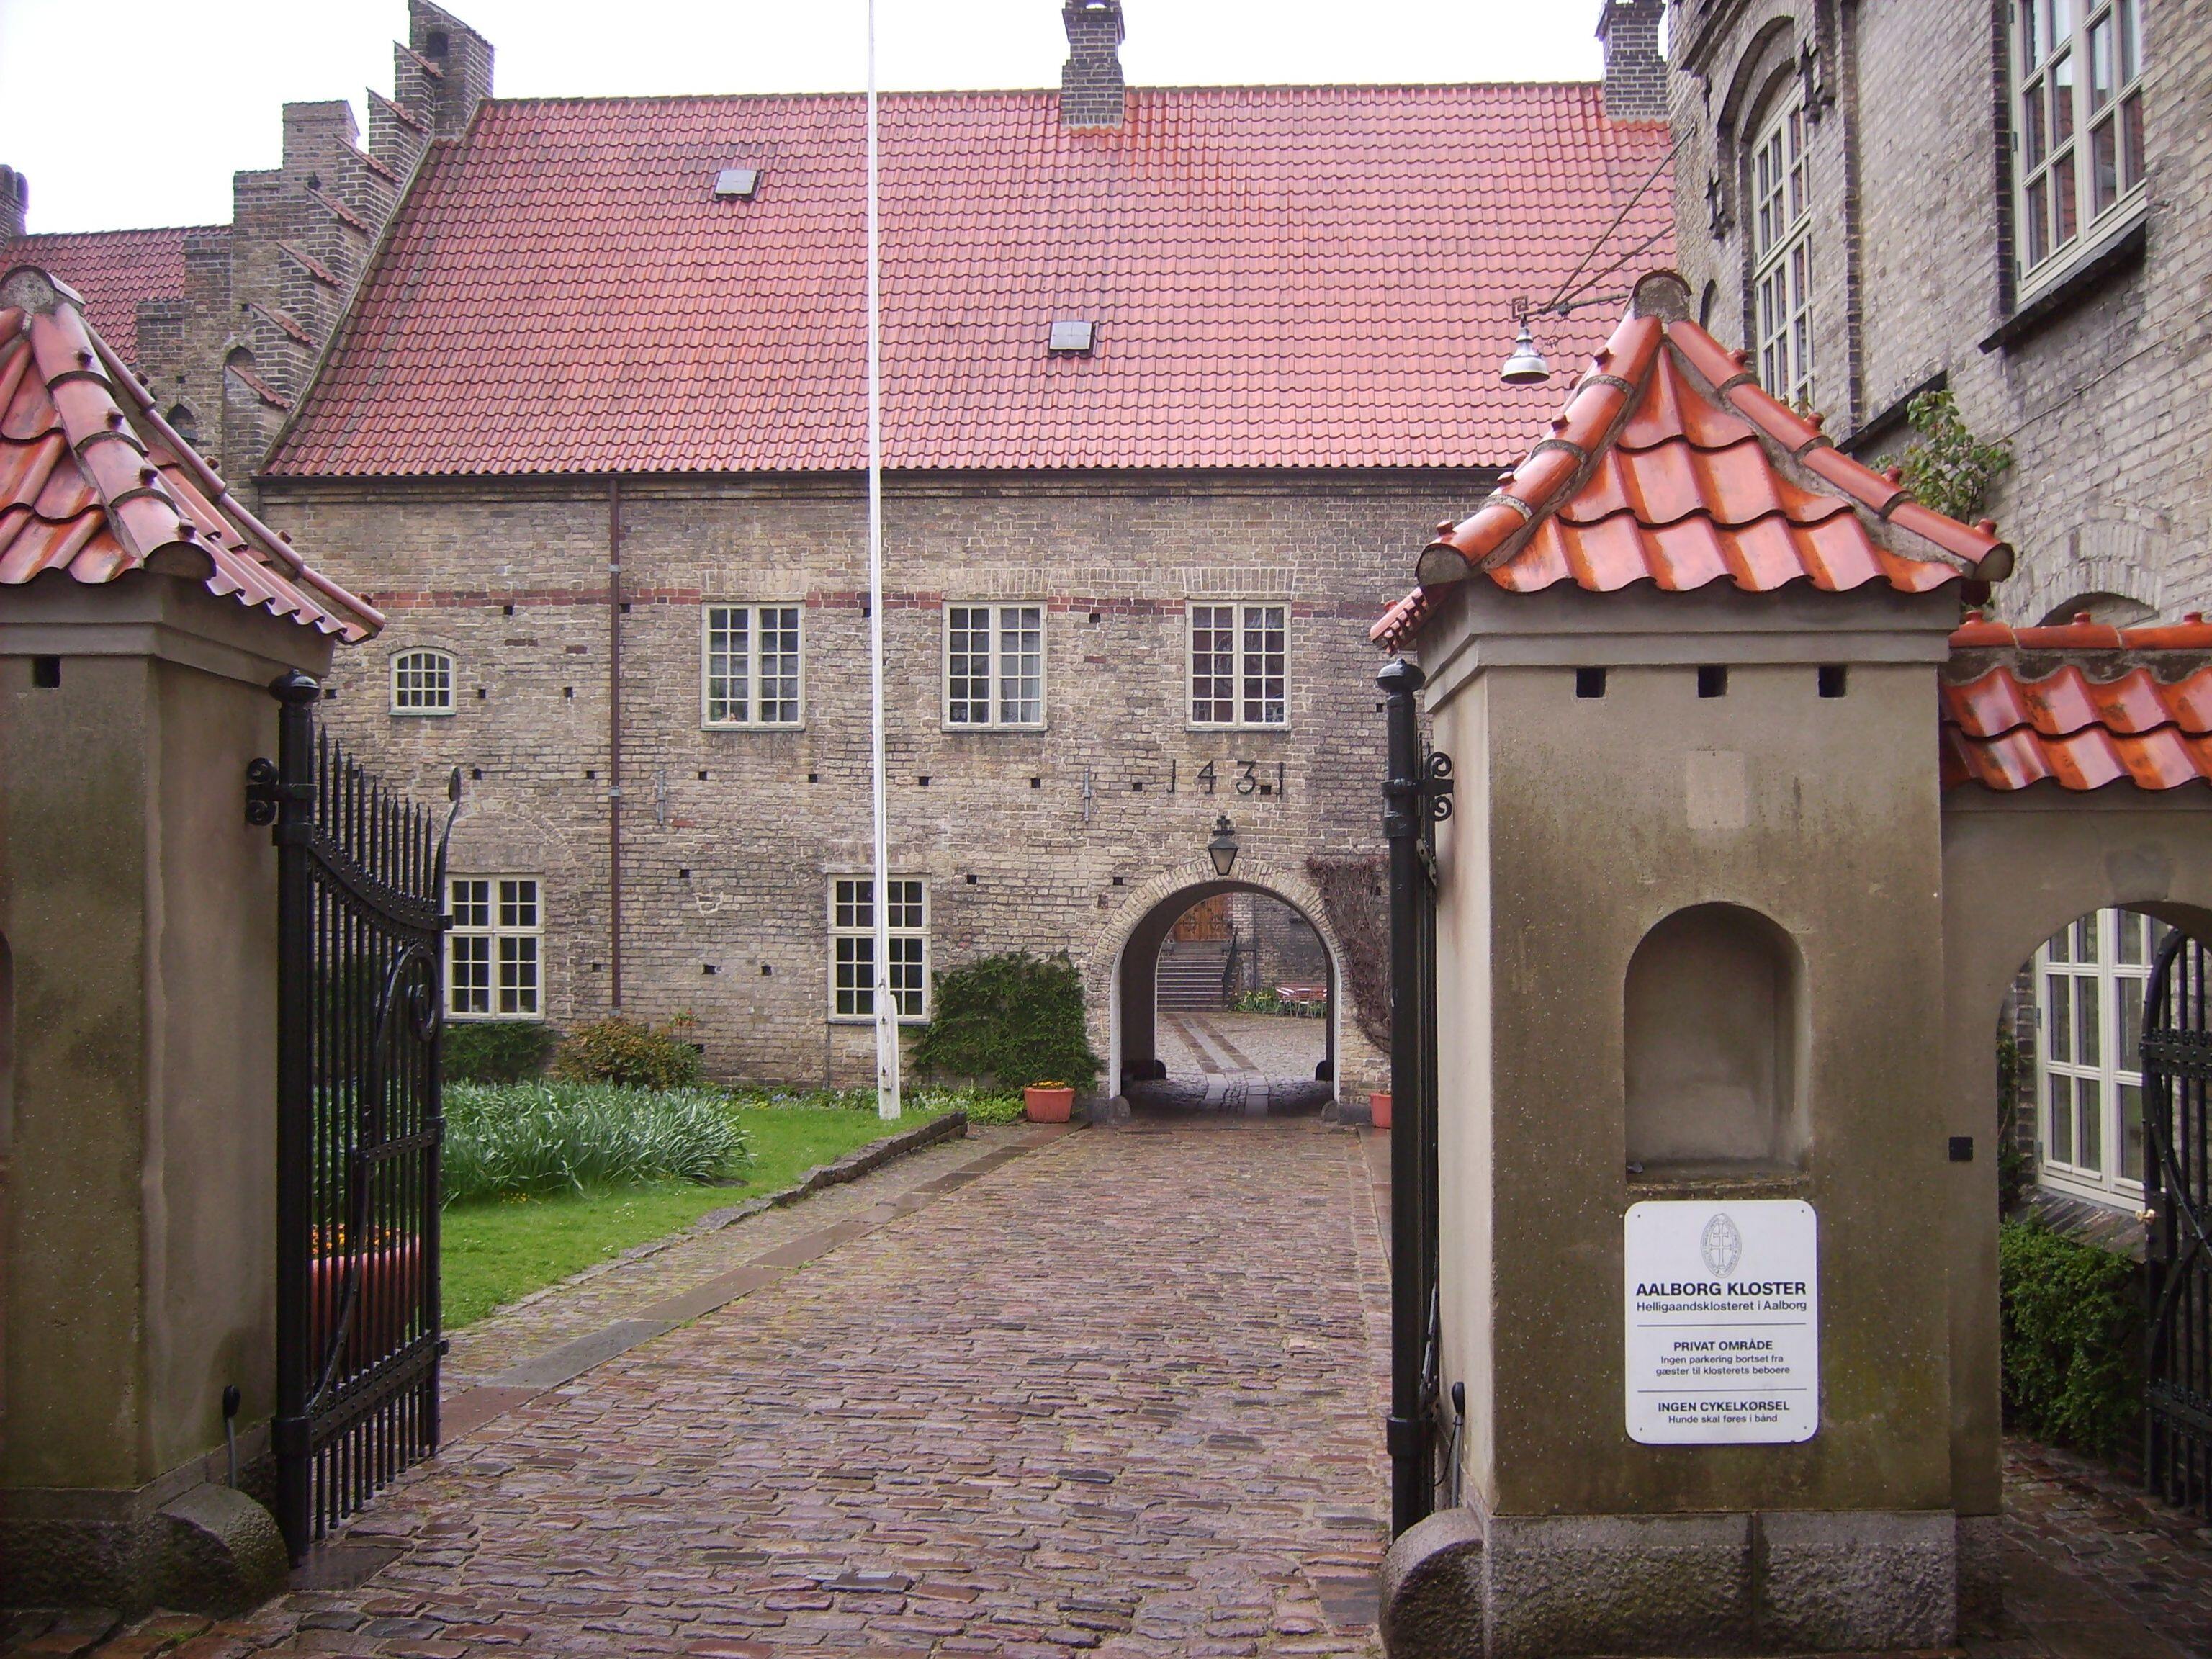 Aalborg monastery of Order of the Holy Ghost from 1451 to the Reformation in 1536. The buildings are from 1431.